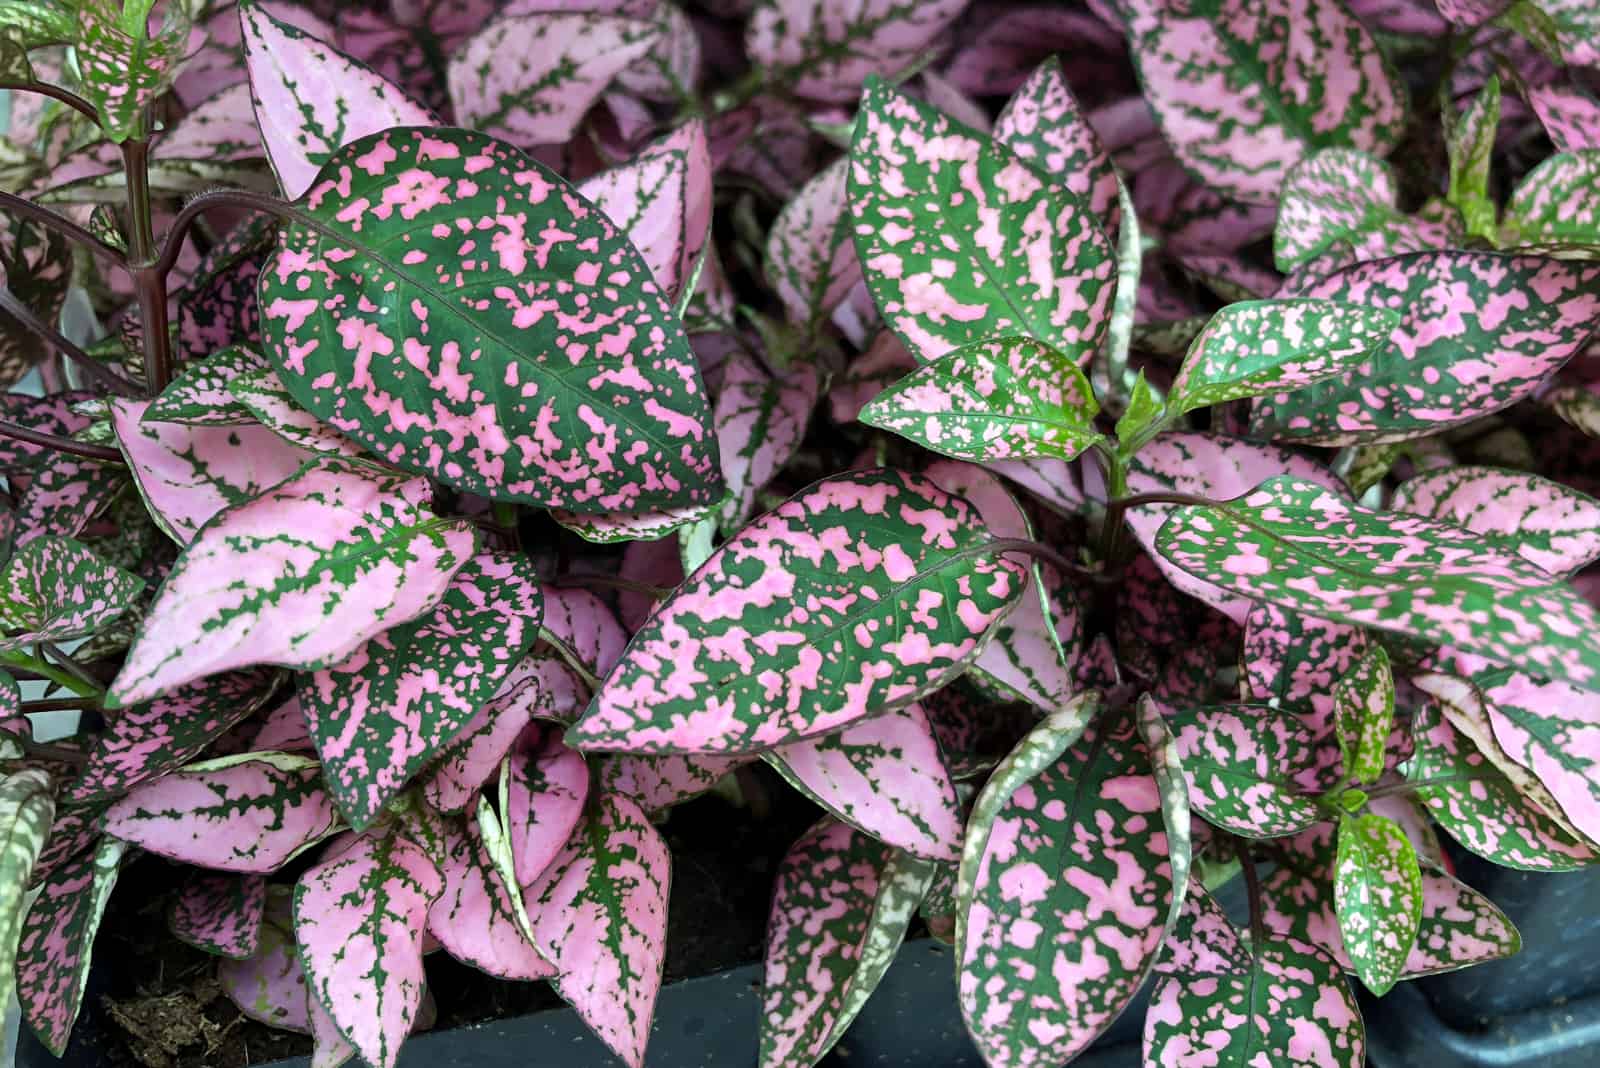 Propagating Polka Dot Plant: What Are The Best Methods?